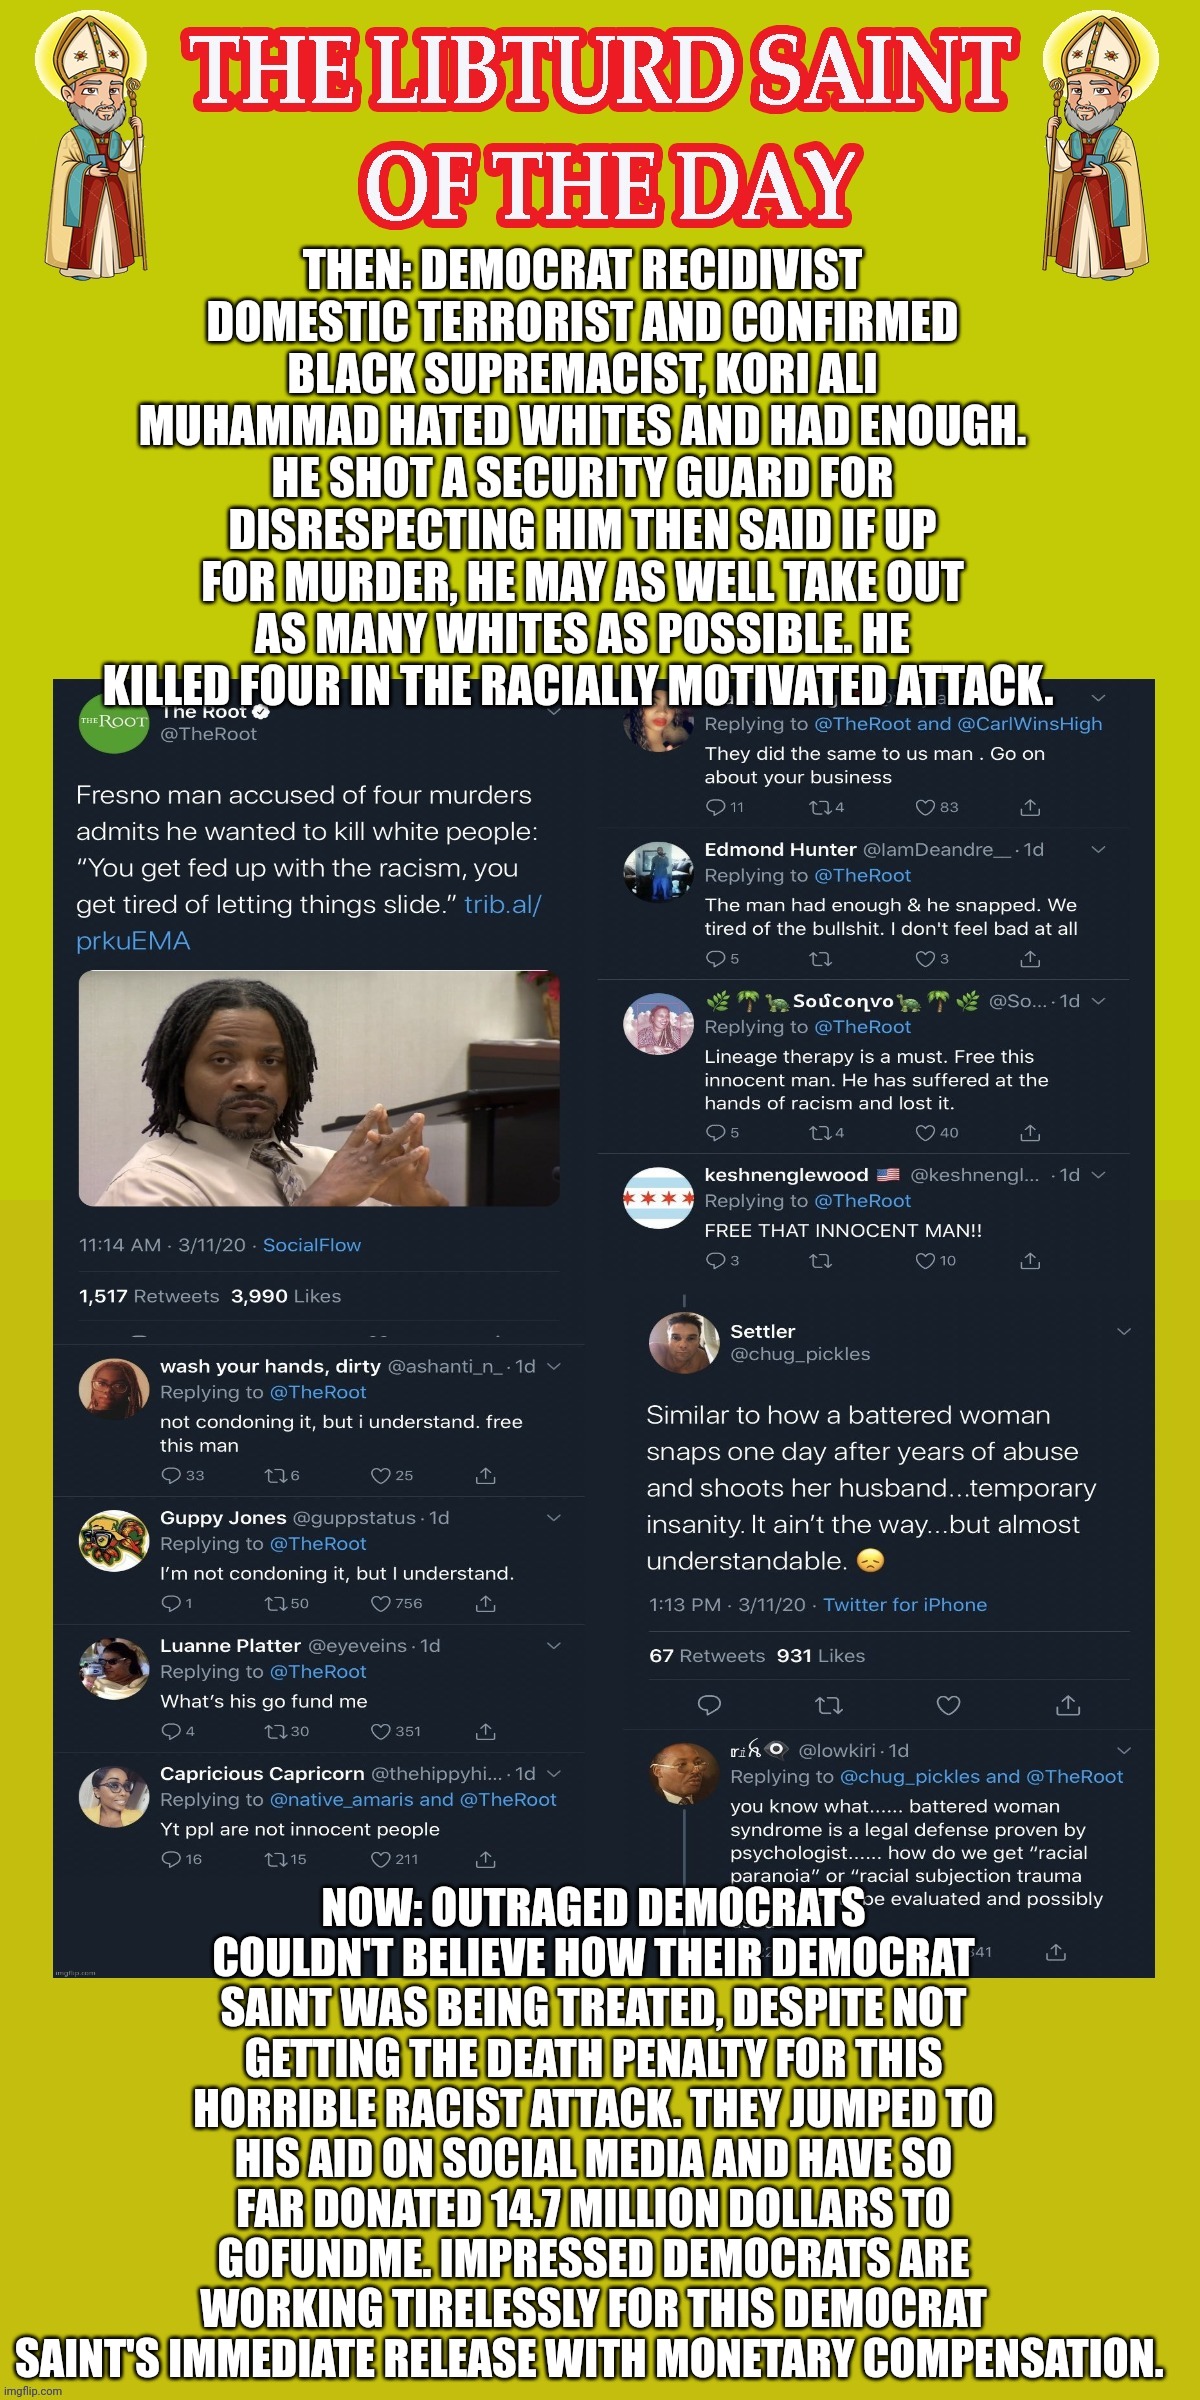 LIBTURD SAINT OF THE DAY - DEMOCRAT DOMESTIC TERRORIST & CONFIRMED BLACK SUPREMICIST - KORI ALI MUHAMMAD - RACIST MASS SHOOTING | THEN: DEMOCRAT RECIDIVIST DOMESTIC TERRORIST AND CONFIRMED BLACK SUPREMACIST, KORI ALI MUHAMMAD HATED WHITES AND HAD ENOUGH. HE SHOT A SECURITY GUARD FOR DISRESPECTING HIM THEN SAID IF UP FOR MURDER, HE MAY AS WELL TAKE OUT AS MANY WHITES AS POSSIBLE. HE KILLED FOUR IN THE RACIALLY MOTIVATED ATTACK. NOW: OUTRAGED DEMOCRATS COULDN'T BELIEVE HOW THEIR DEMOCRAT SAINT WAS BEING TREATED, DESPITE NOT GETTING THE DEATH PENALTY FOR THIS HORRIBLE RACIST ATTACK. THEY JUMPED TO HIS AID ON SOCIAL MEDIA AND HAVE SO FAR DONATED 14.7 MILLION DOLLARS TO GOFUNDME. IMPRESSED DEMOCRATS ARE WORKING TIRELESSLY FOR THIS DEMOCRAT SAINT'S IMMEDIATE RELEASE WITH MONETARY COMPENSATION. | image tagged in lotd,libturd saint of the day,kori ali muhammad | made w/ Imgflip meme maker